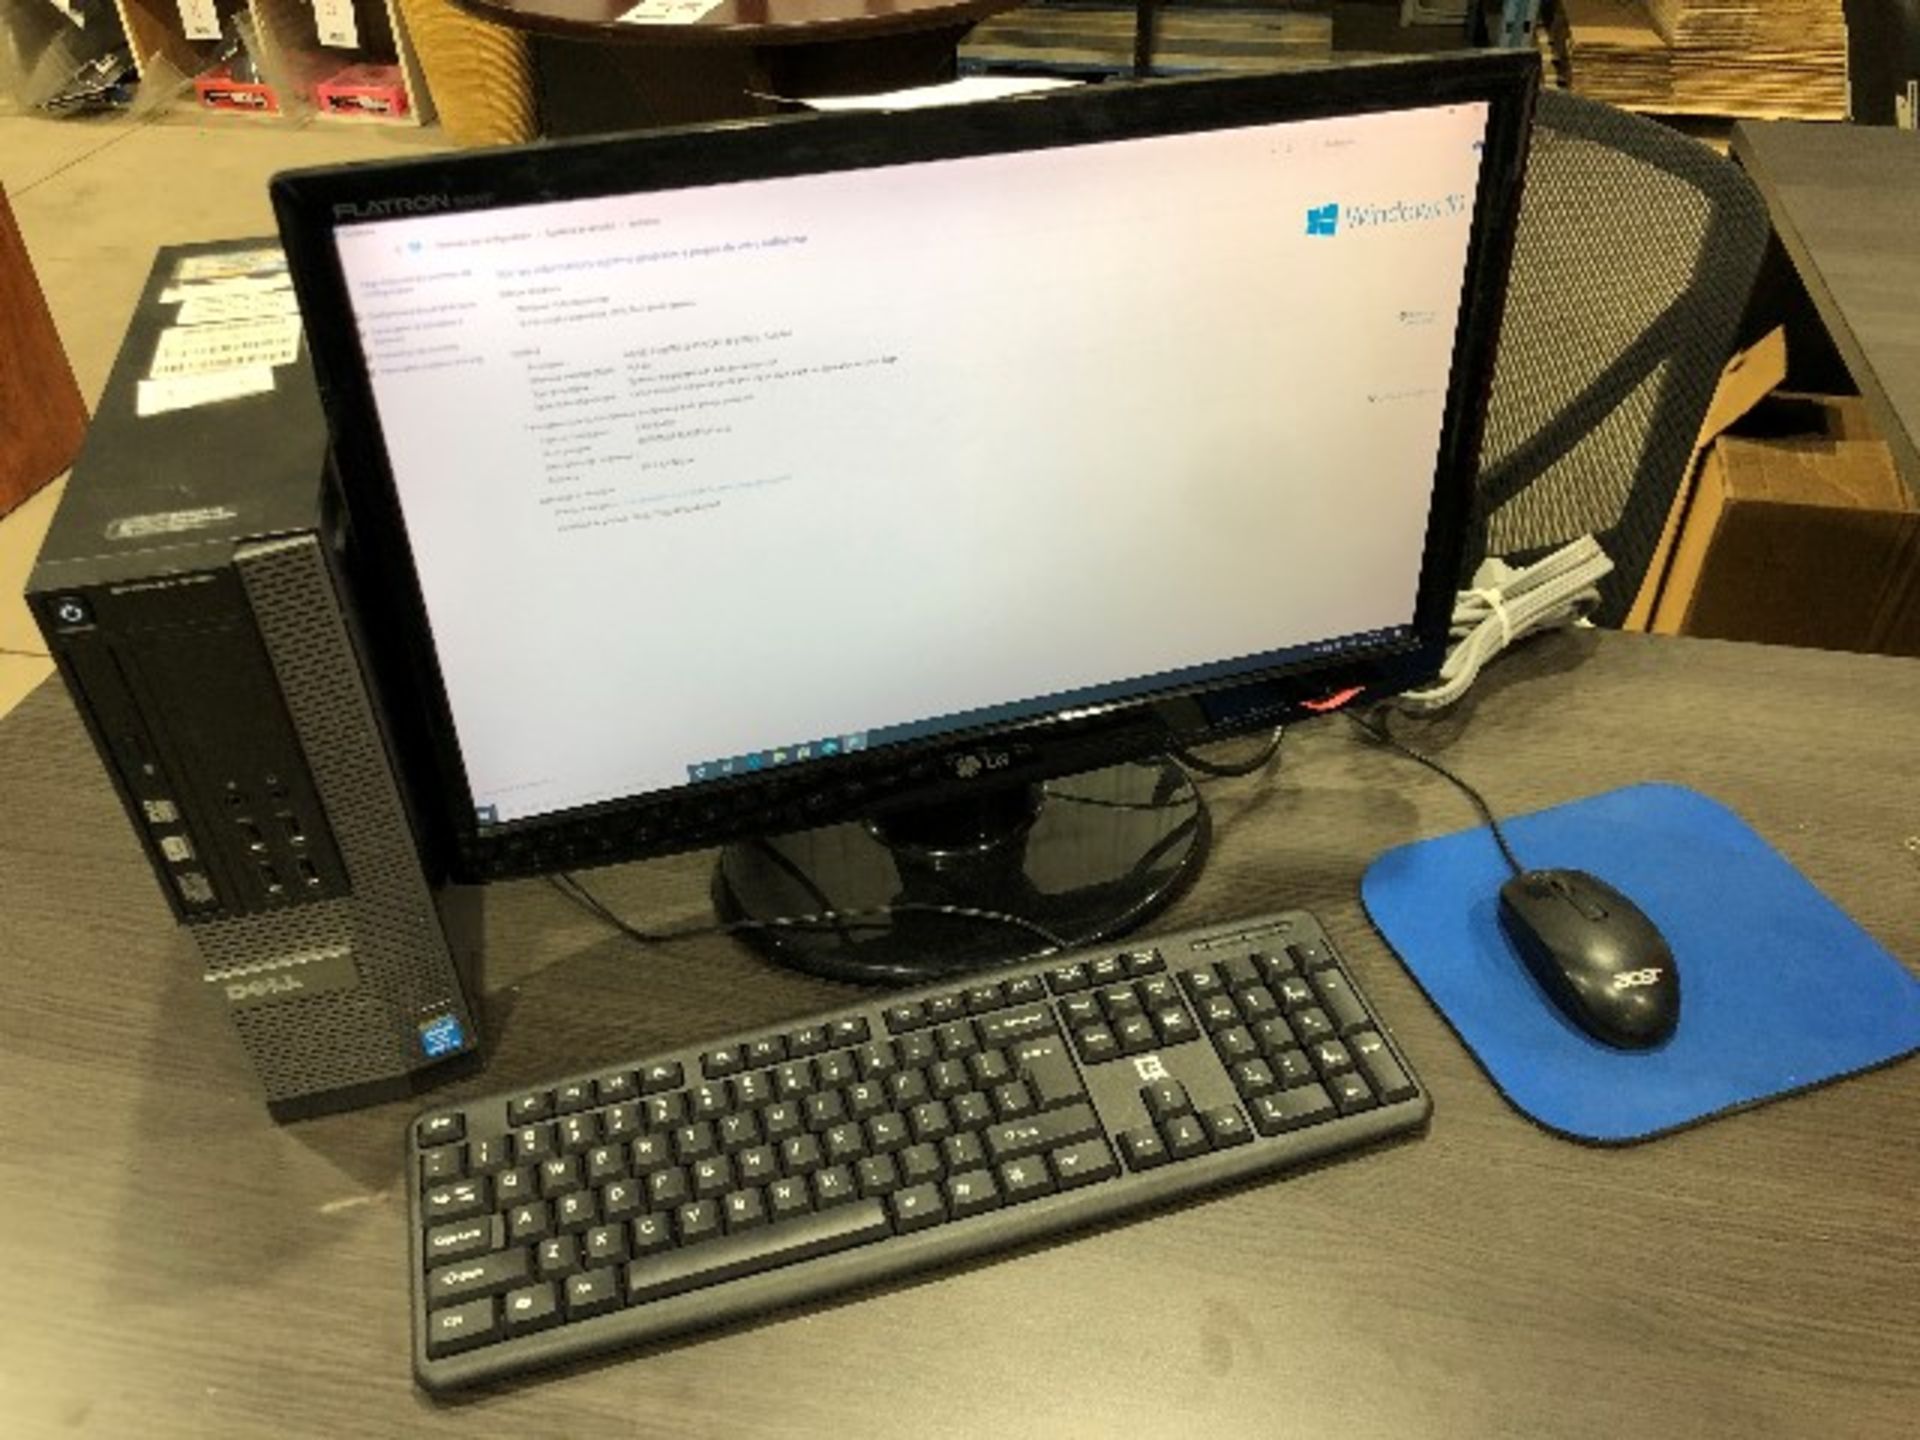 Dell i5vPro, 3.2 Ghz, 16GB RAM, 250GB SSD, monitor, keyboard, mouse